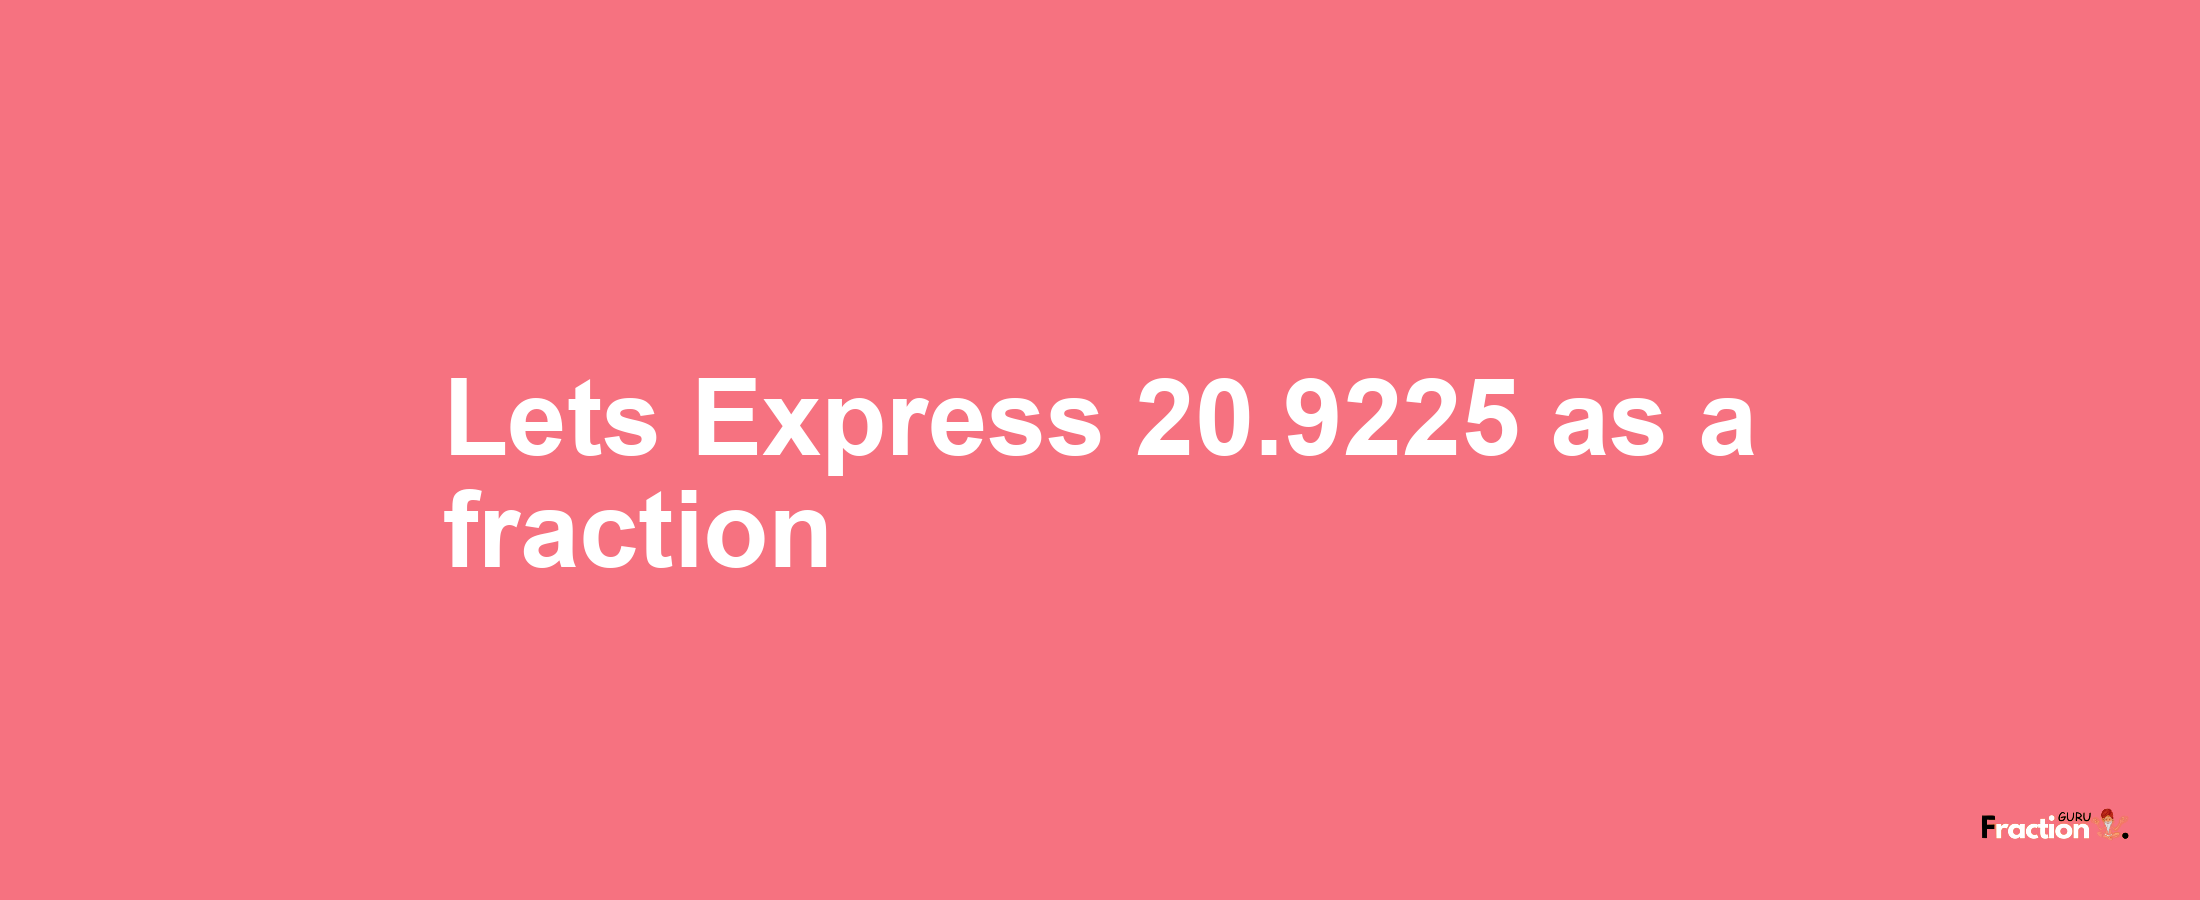 Lets Express 20.9225 as afraction